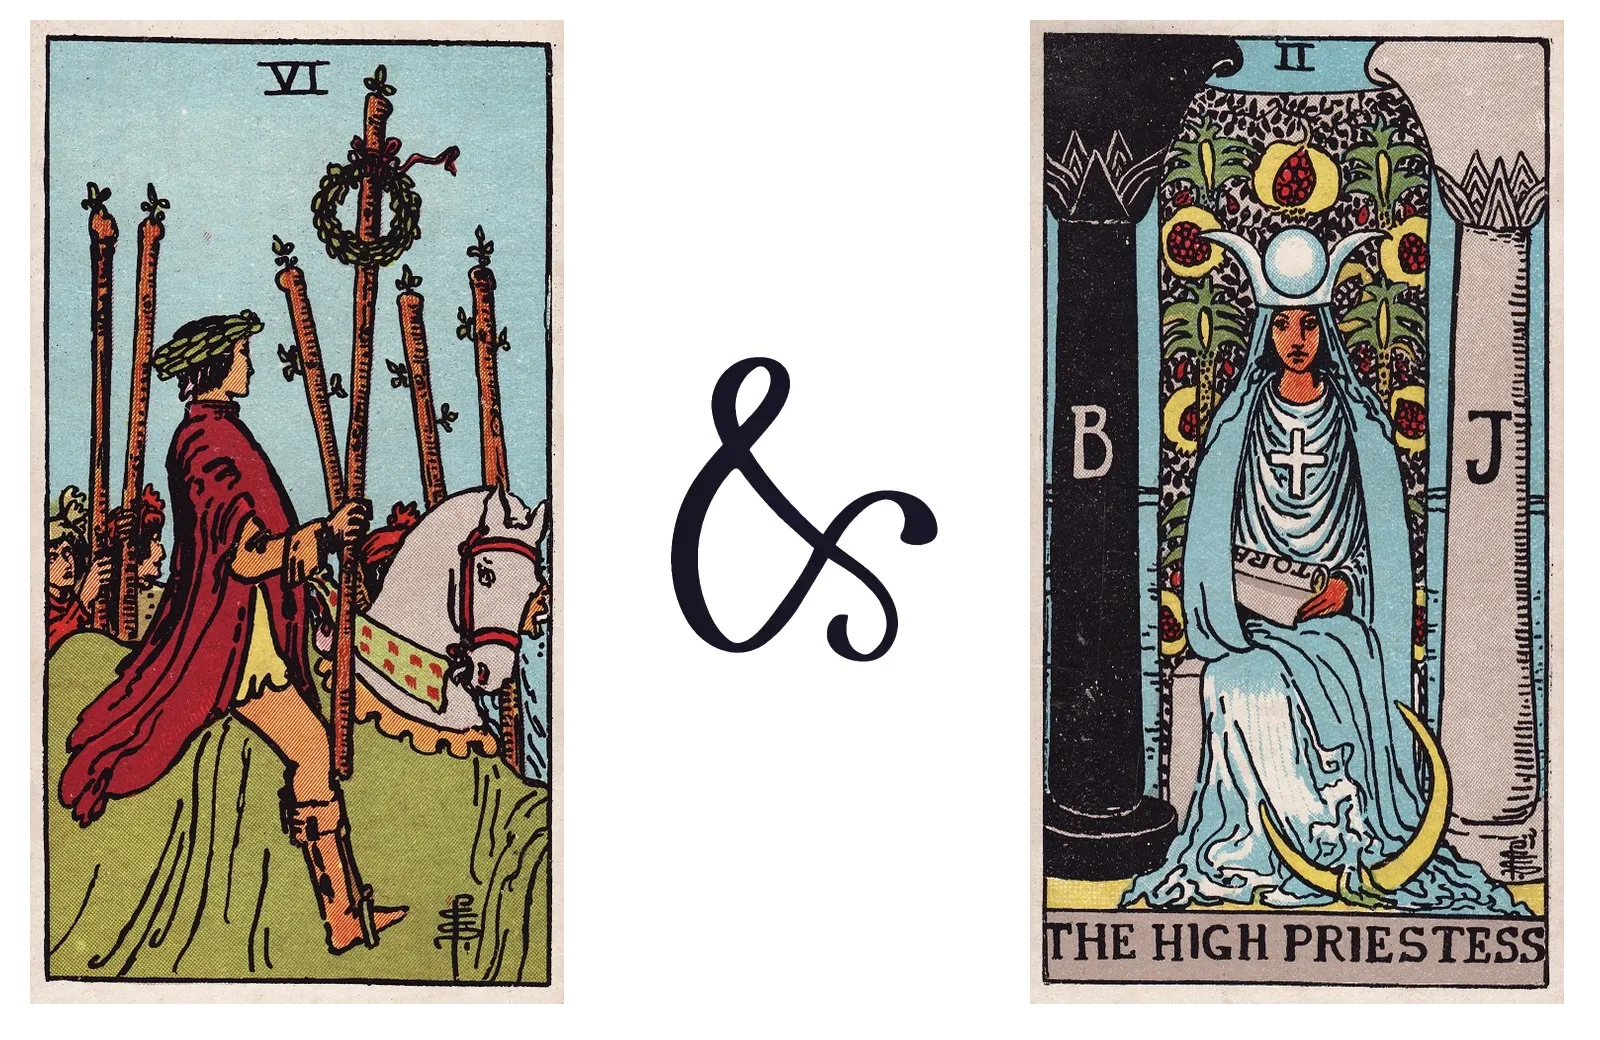 Six of Wands and The High Priestess